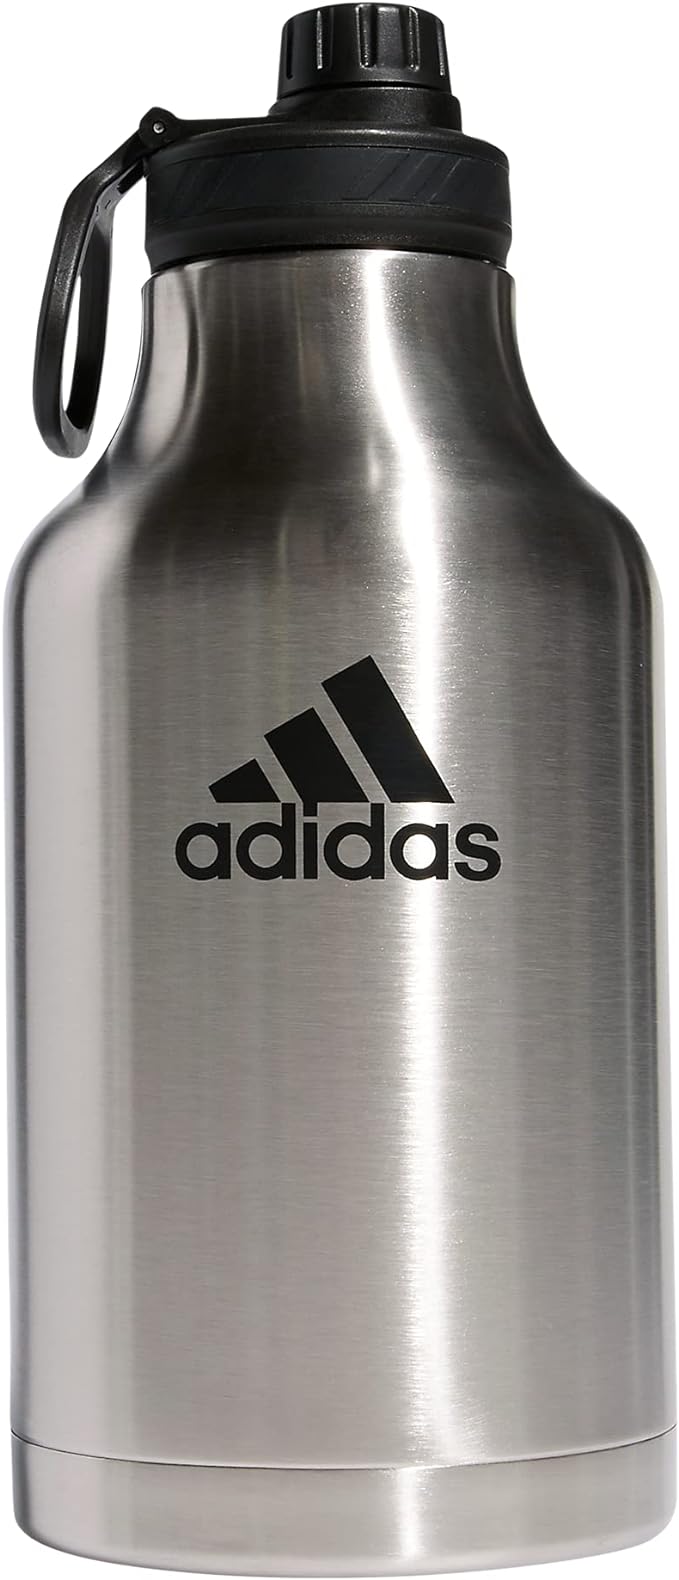 2-Liter adidas Double-Wall Insulated Stainless Steel Water Bottle $24 + Free Shipping